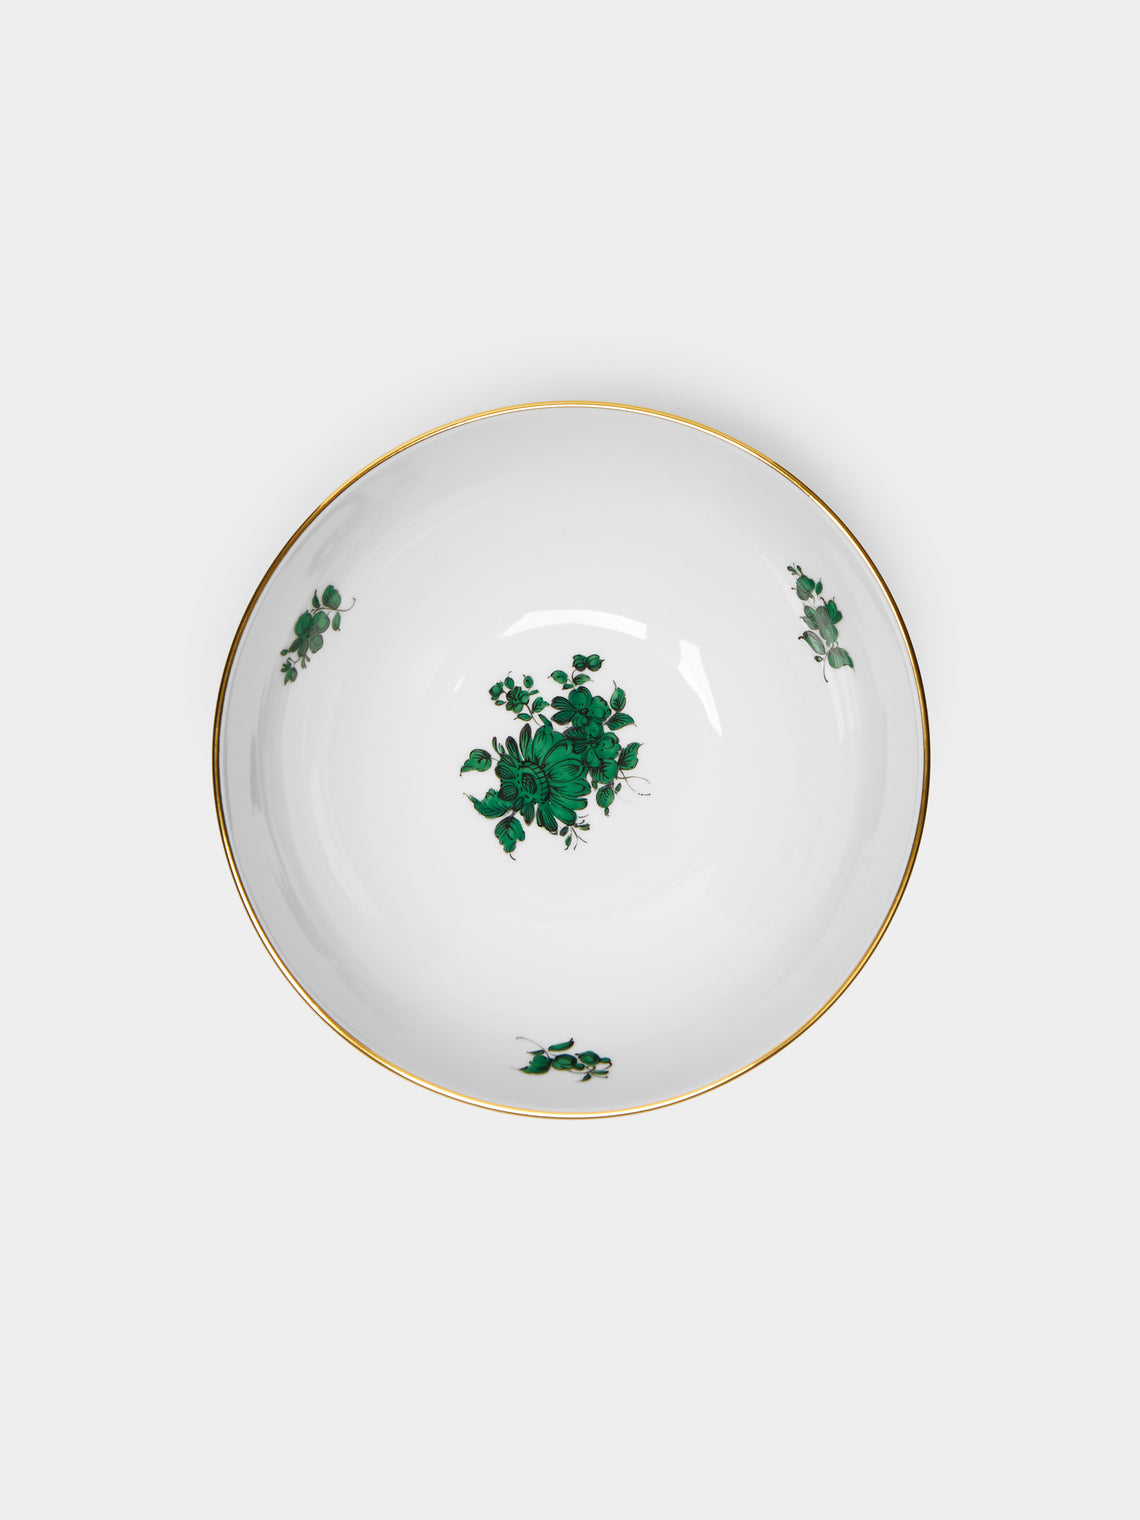 Augarten - Maria Theresia Hand-Painted Porcelain Bowl -  - ABASK